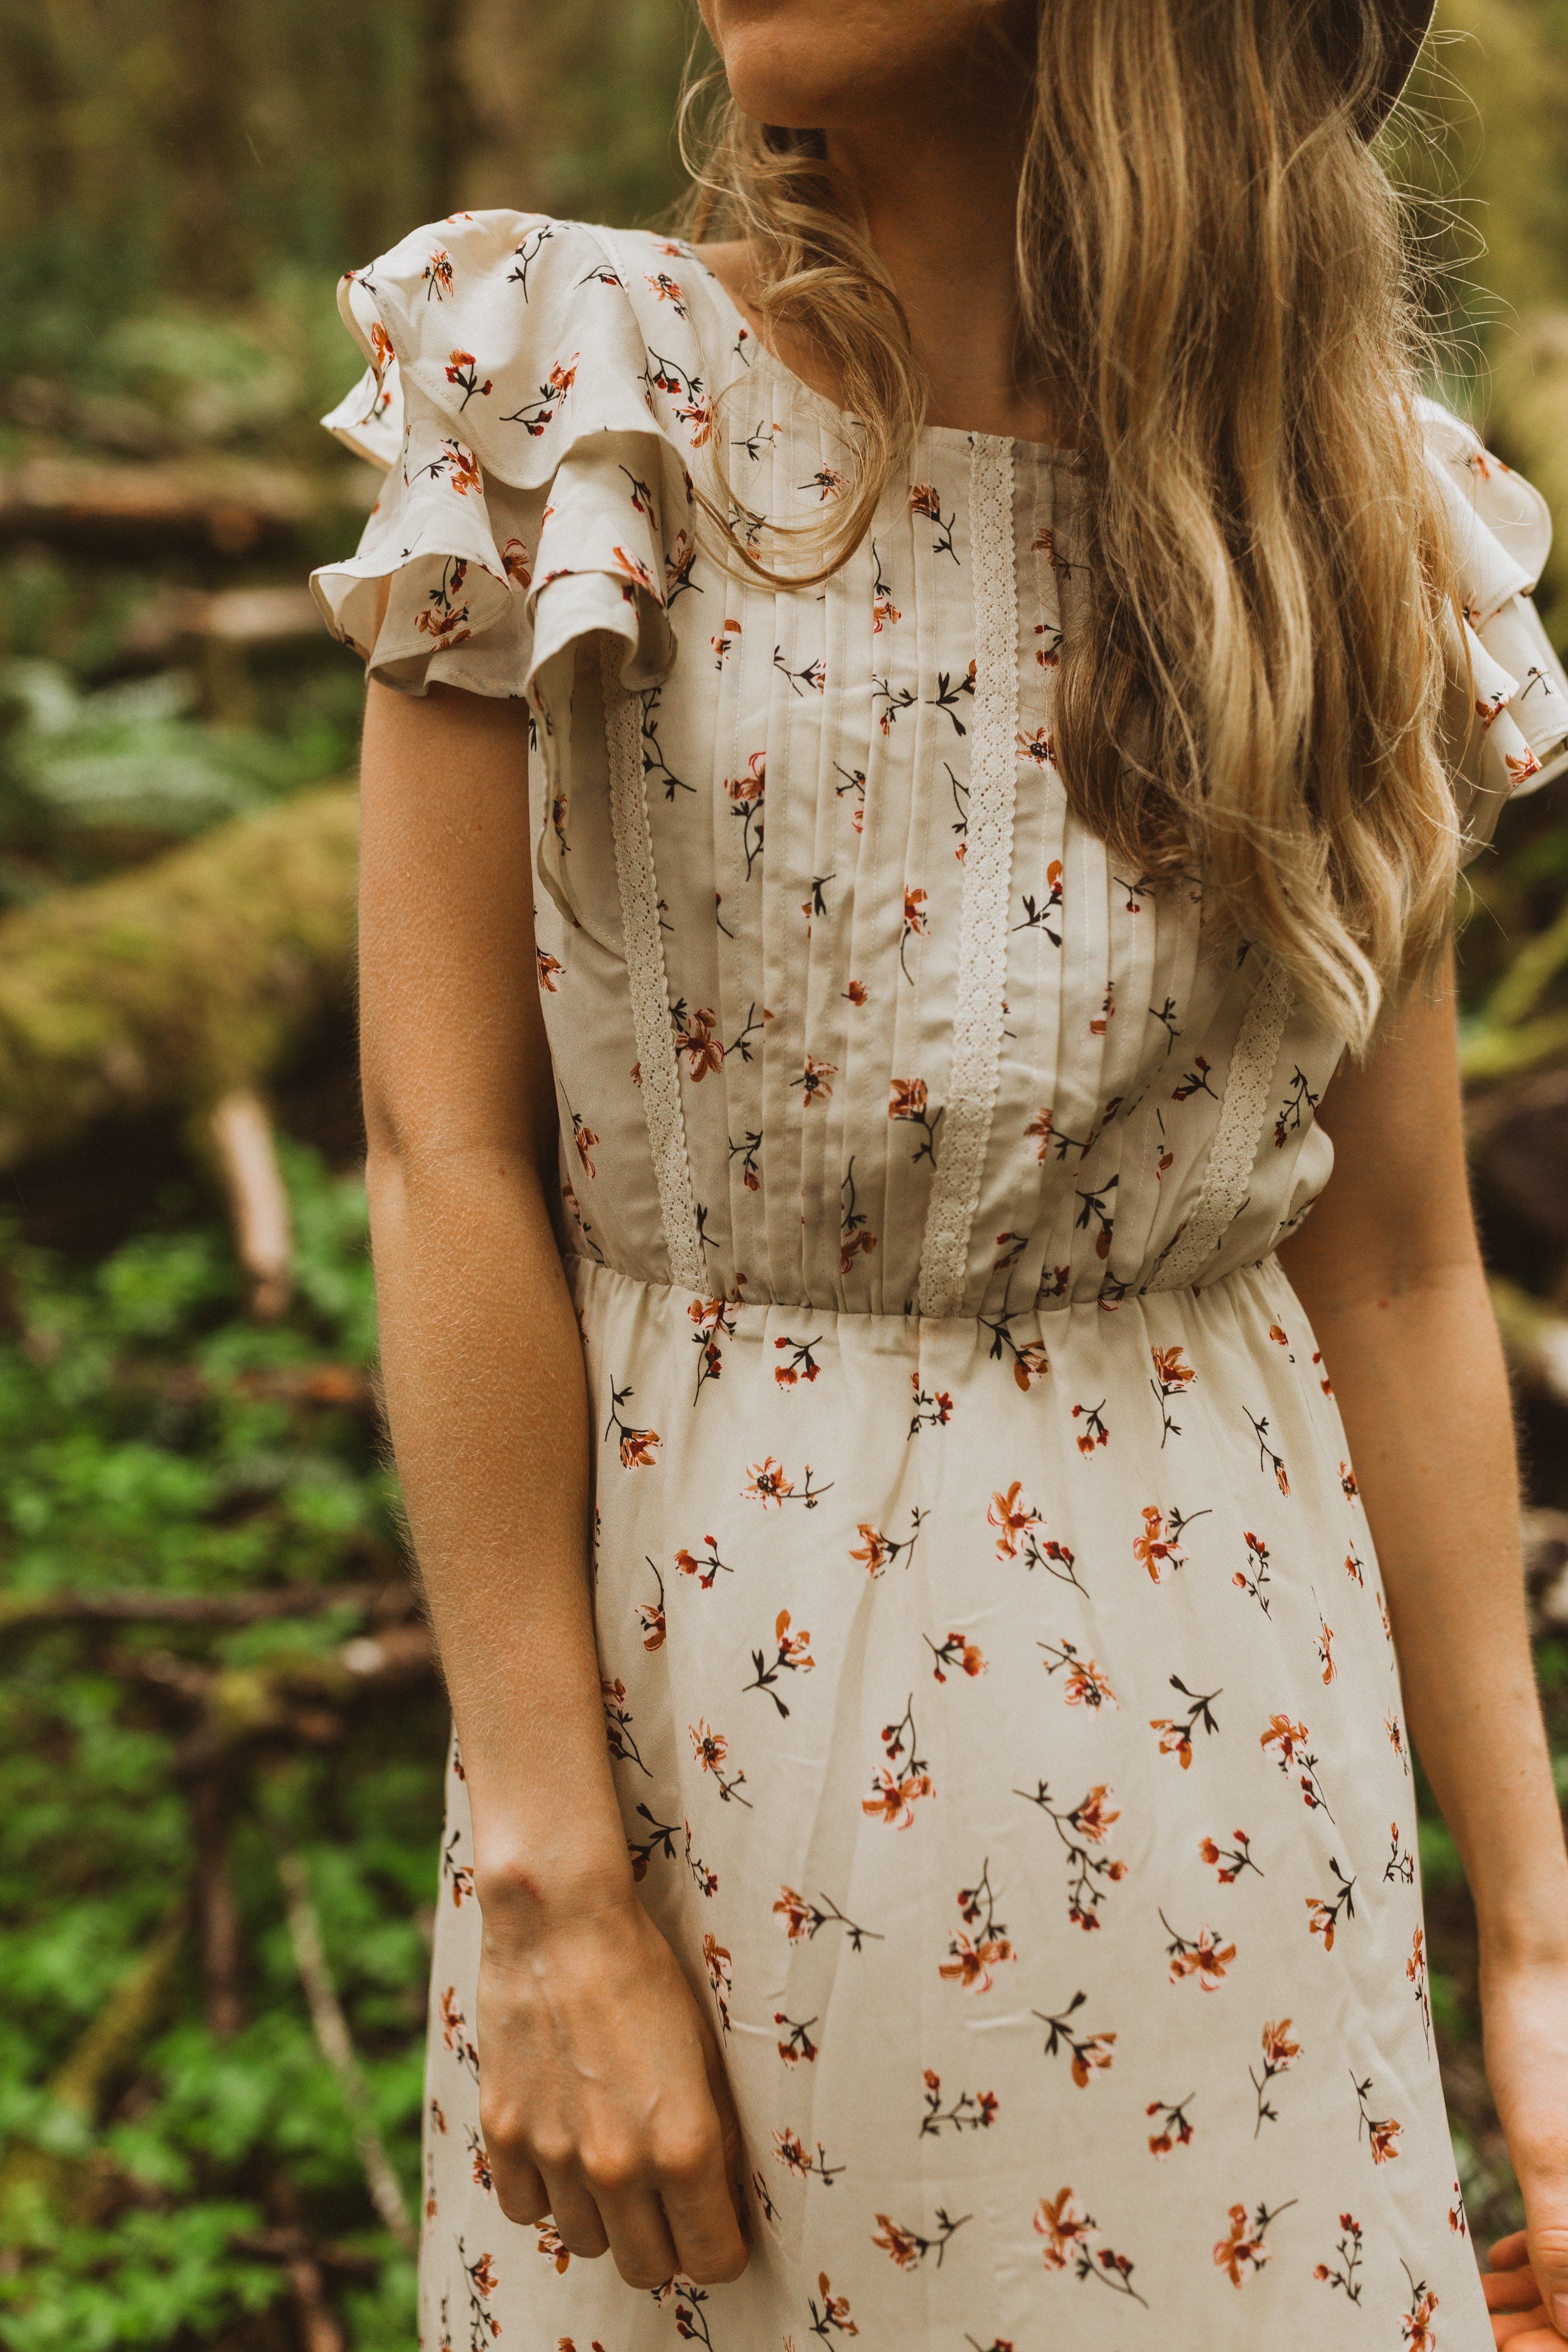 The Impassion Floral Flutter Dress in Cream -   17 dress Simple floral ideas